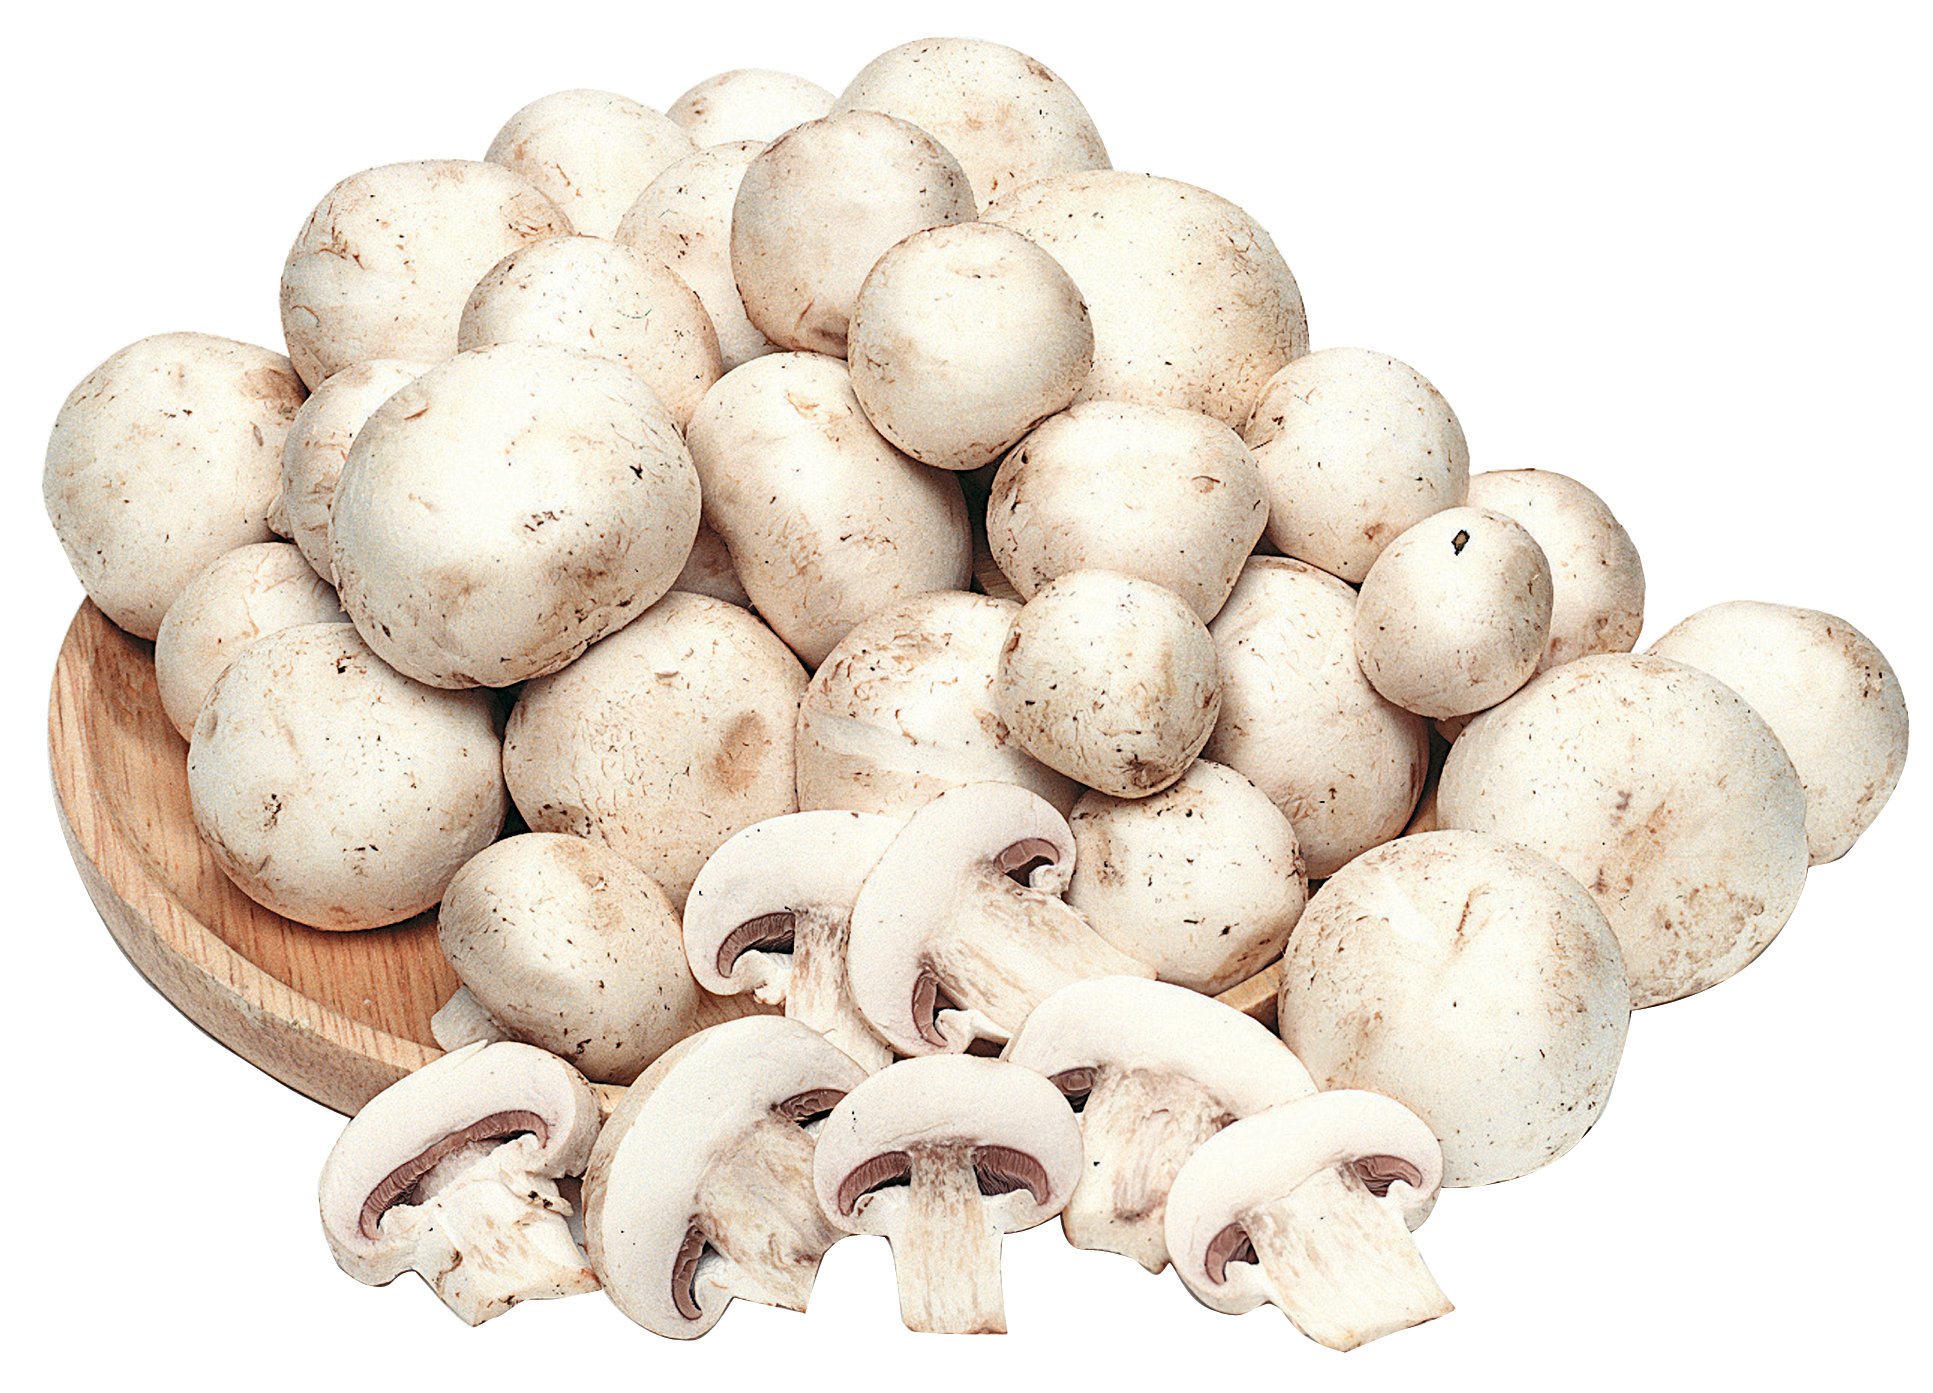 White mushrooms whole and sliced on wooden board Food Picture